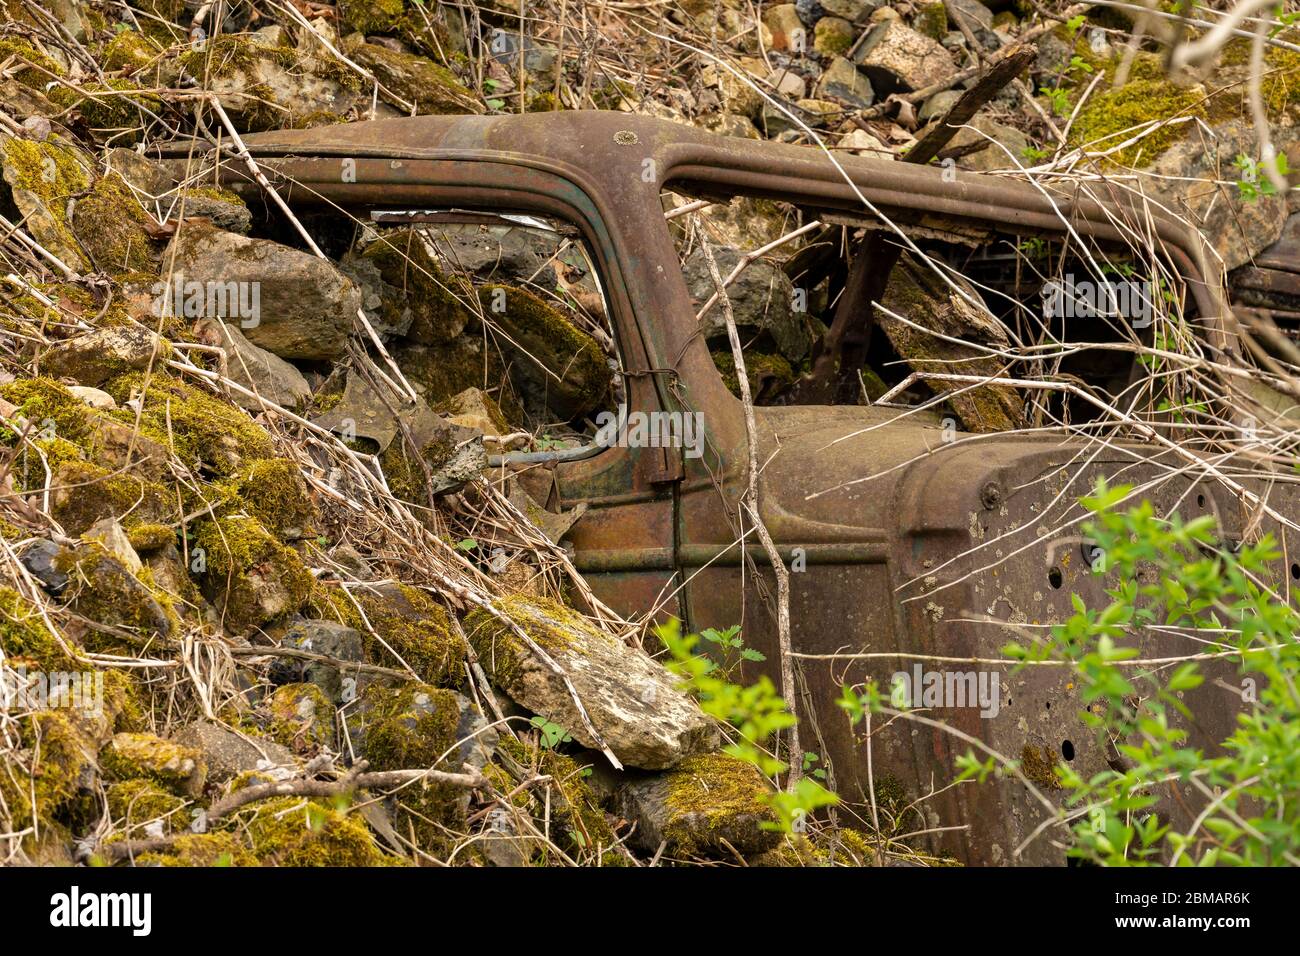 Old Cars Buried For Erosion Control Stock Photo